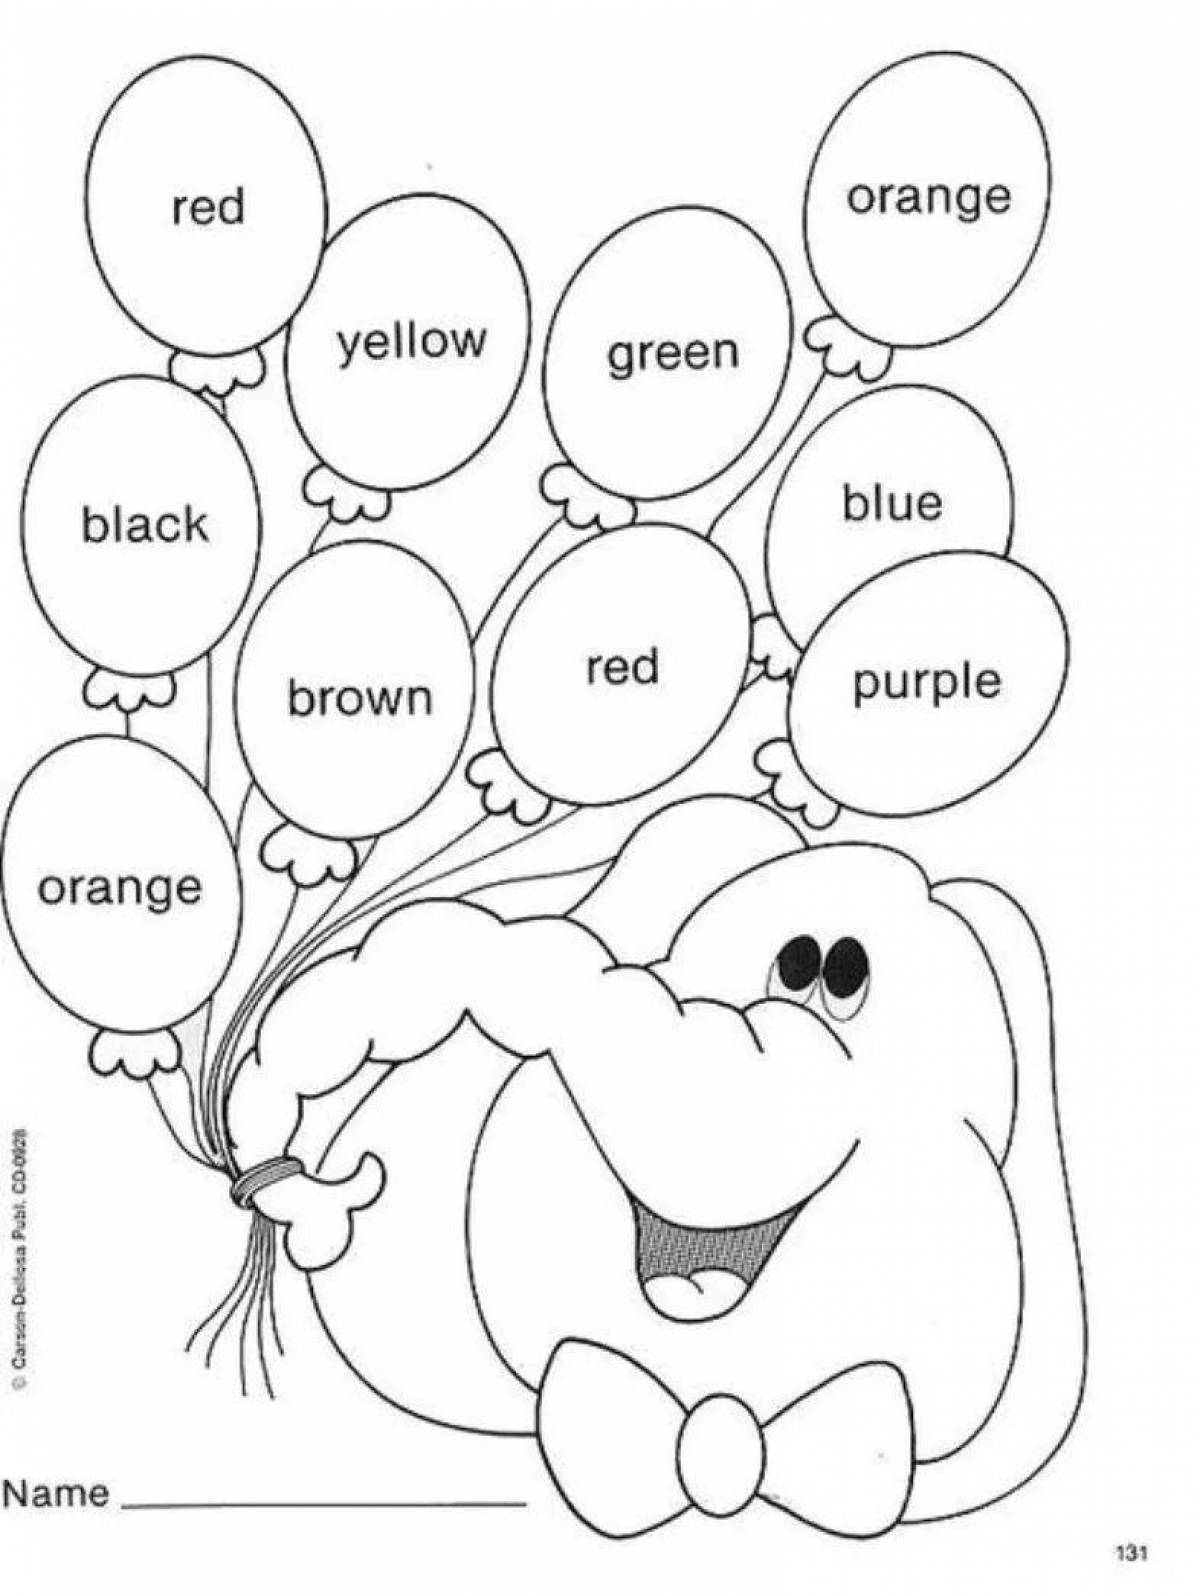 Radiant coloring page english colors